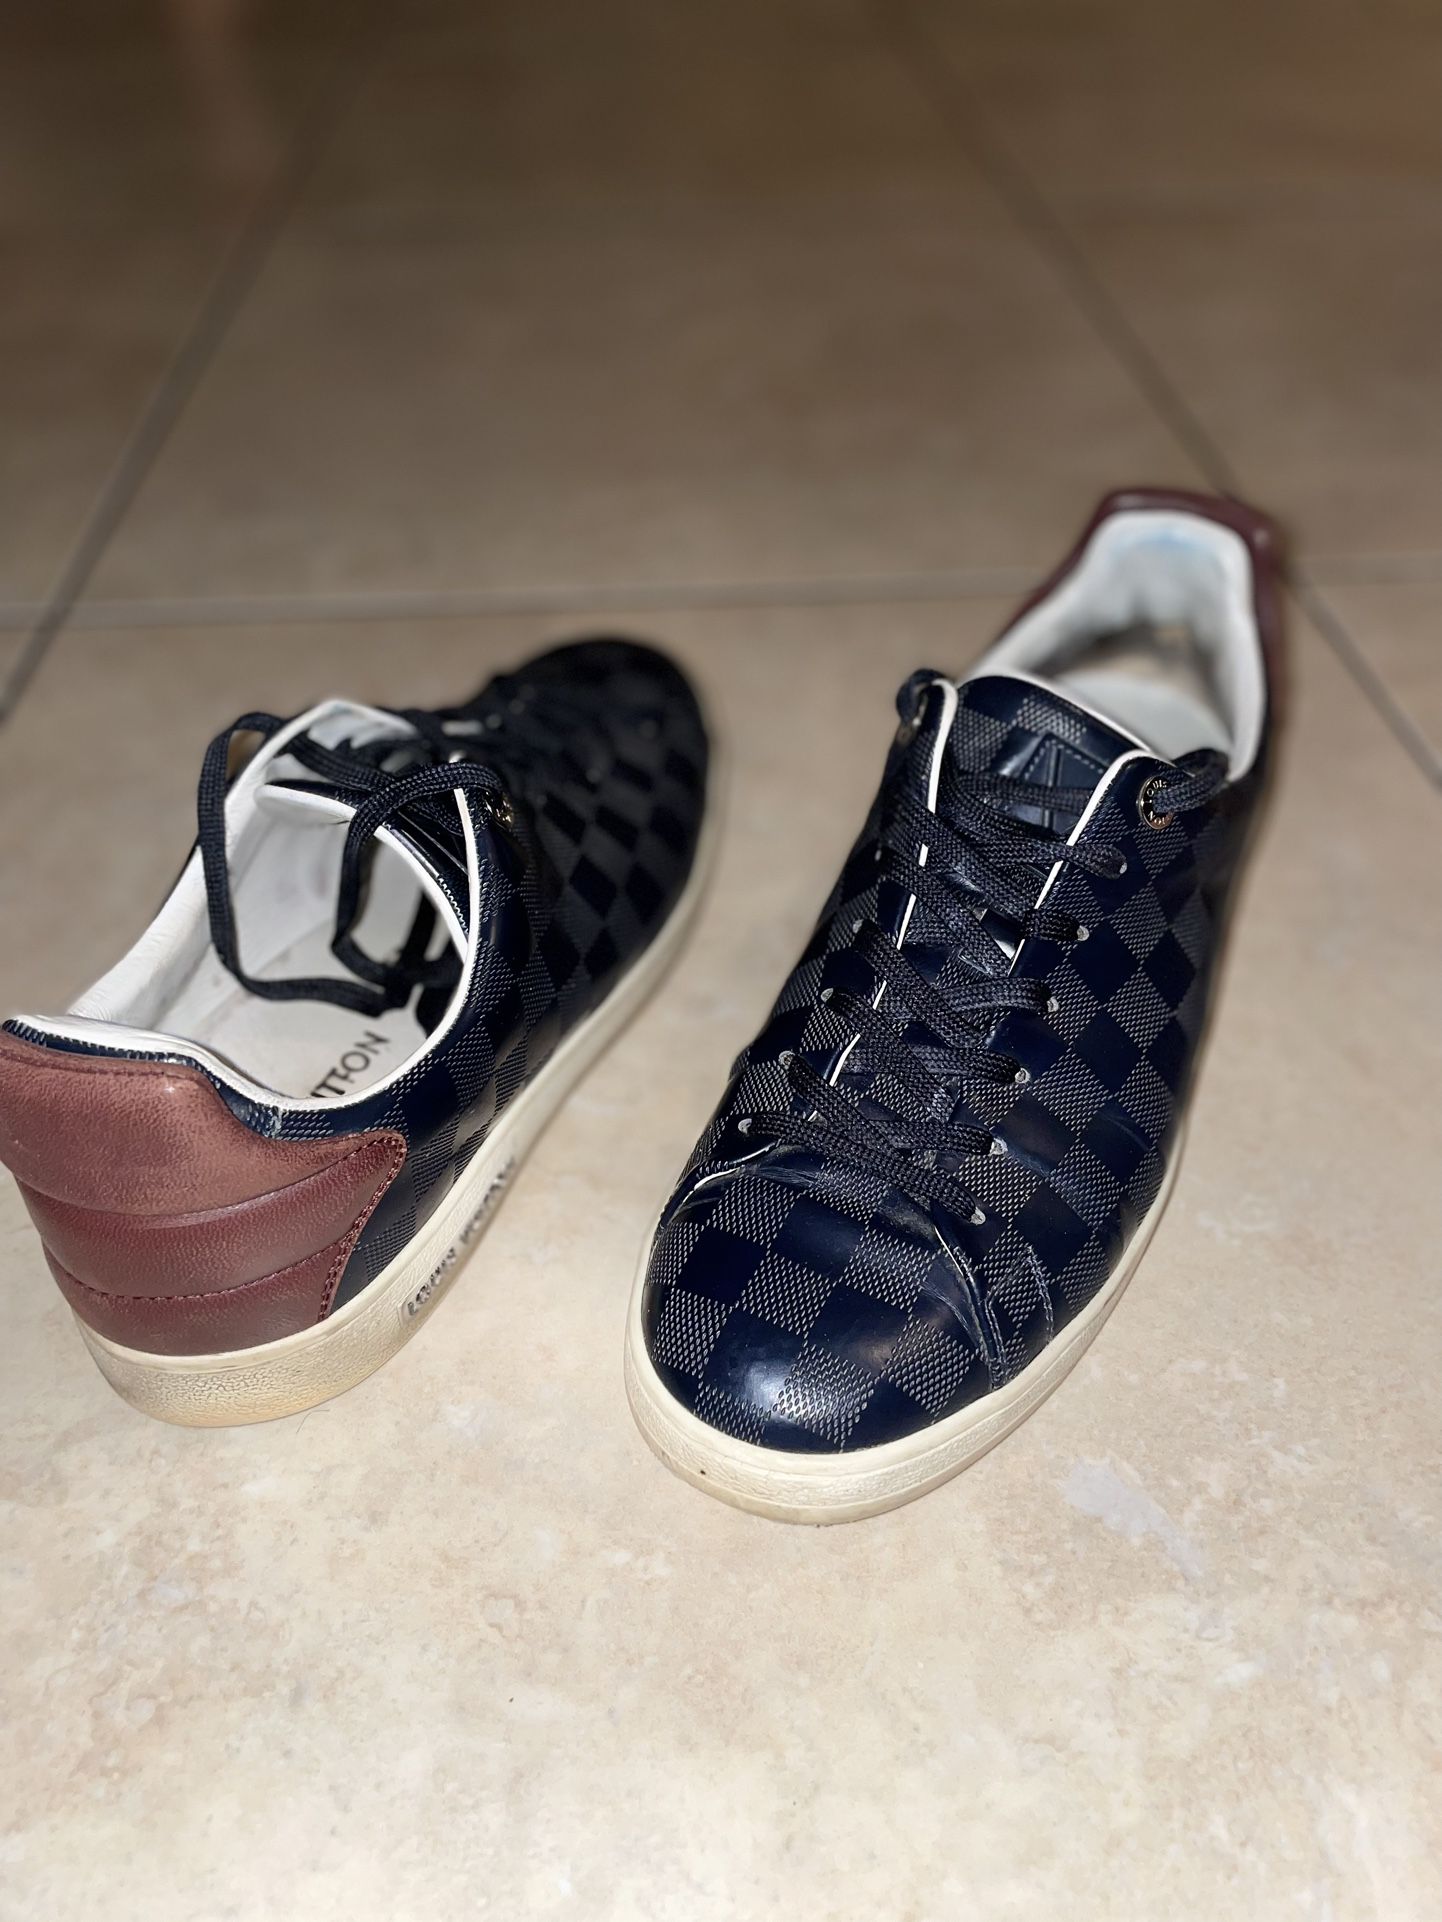 Louis Vuitton Size 8 1/2 Men's Shoe for Sale in Queens, NY - OfferUp